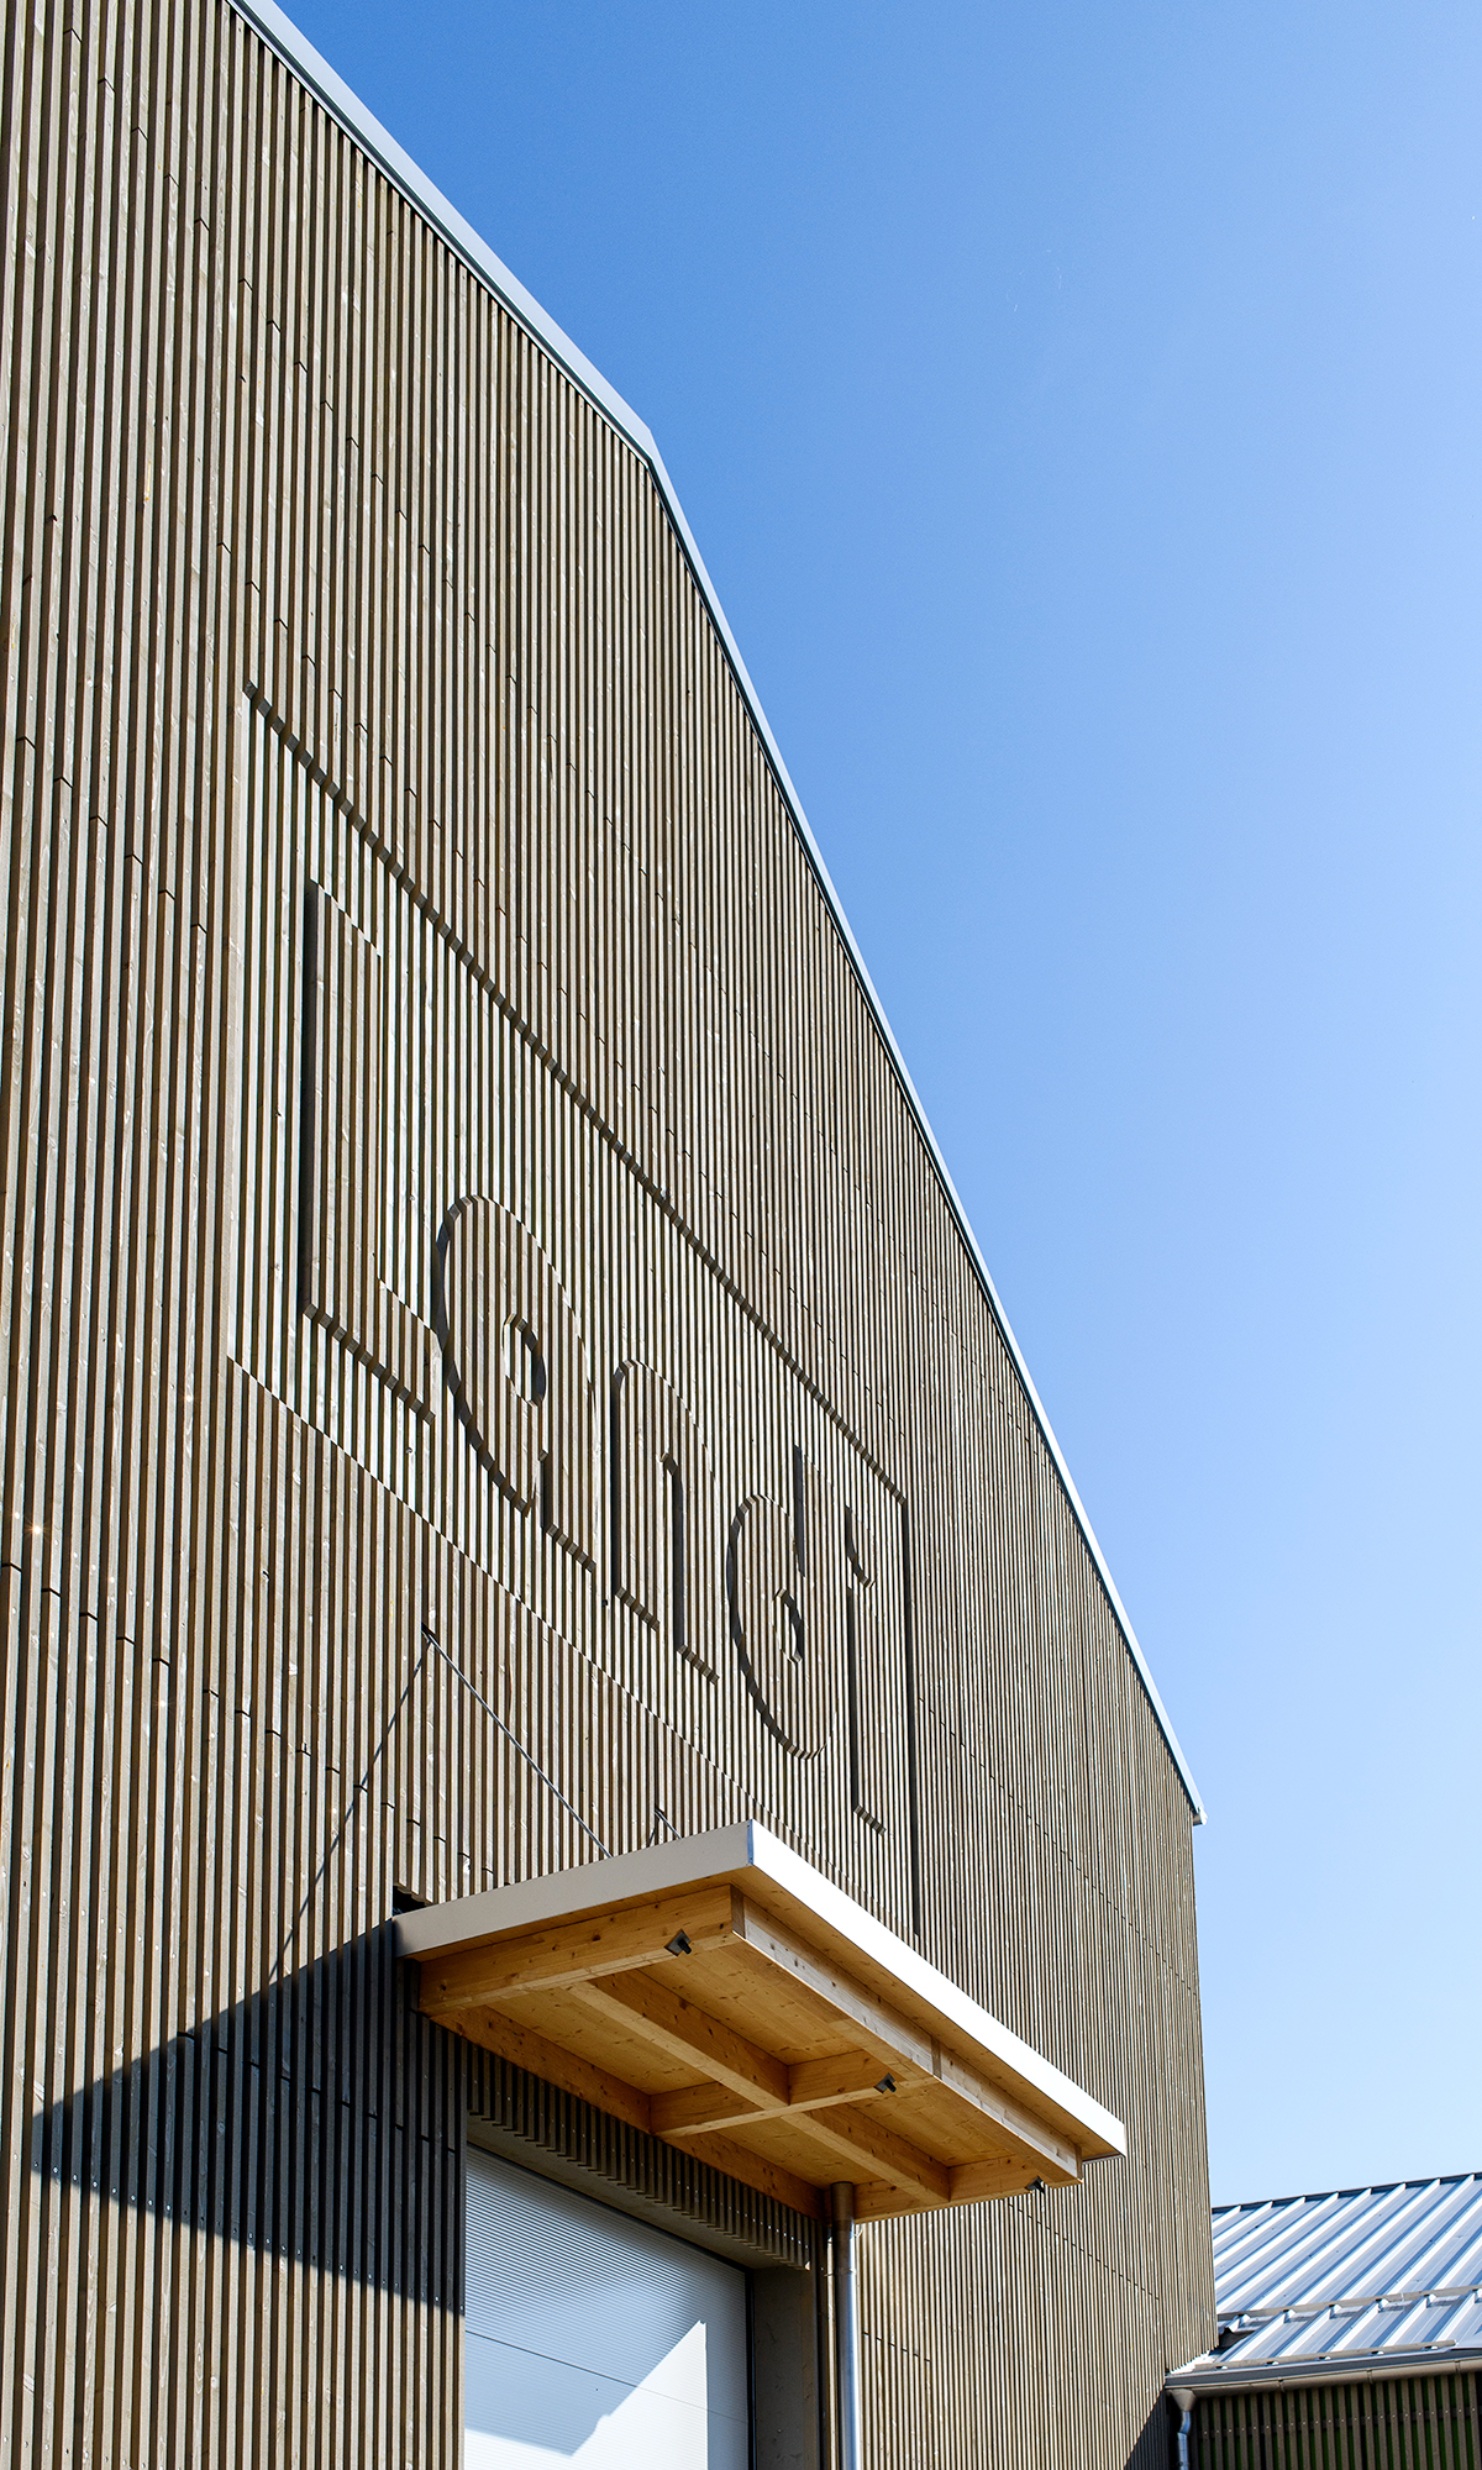 The photograph shows the facade with the address of the Landi branch processed in wood.